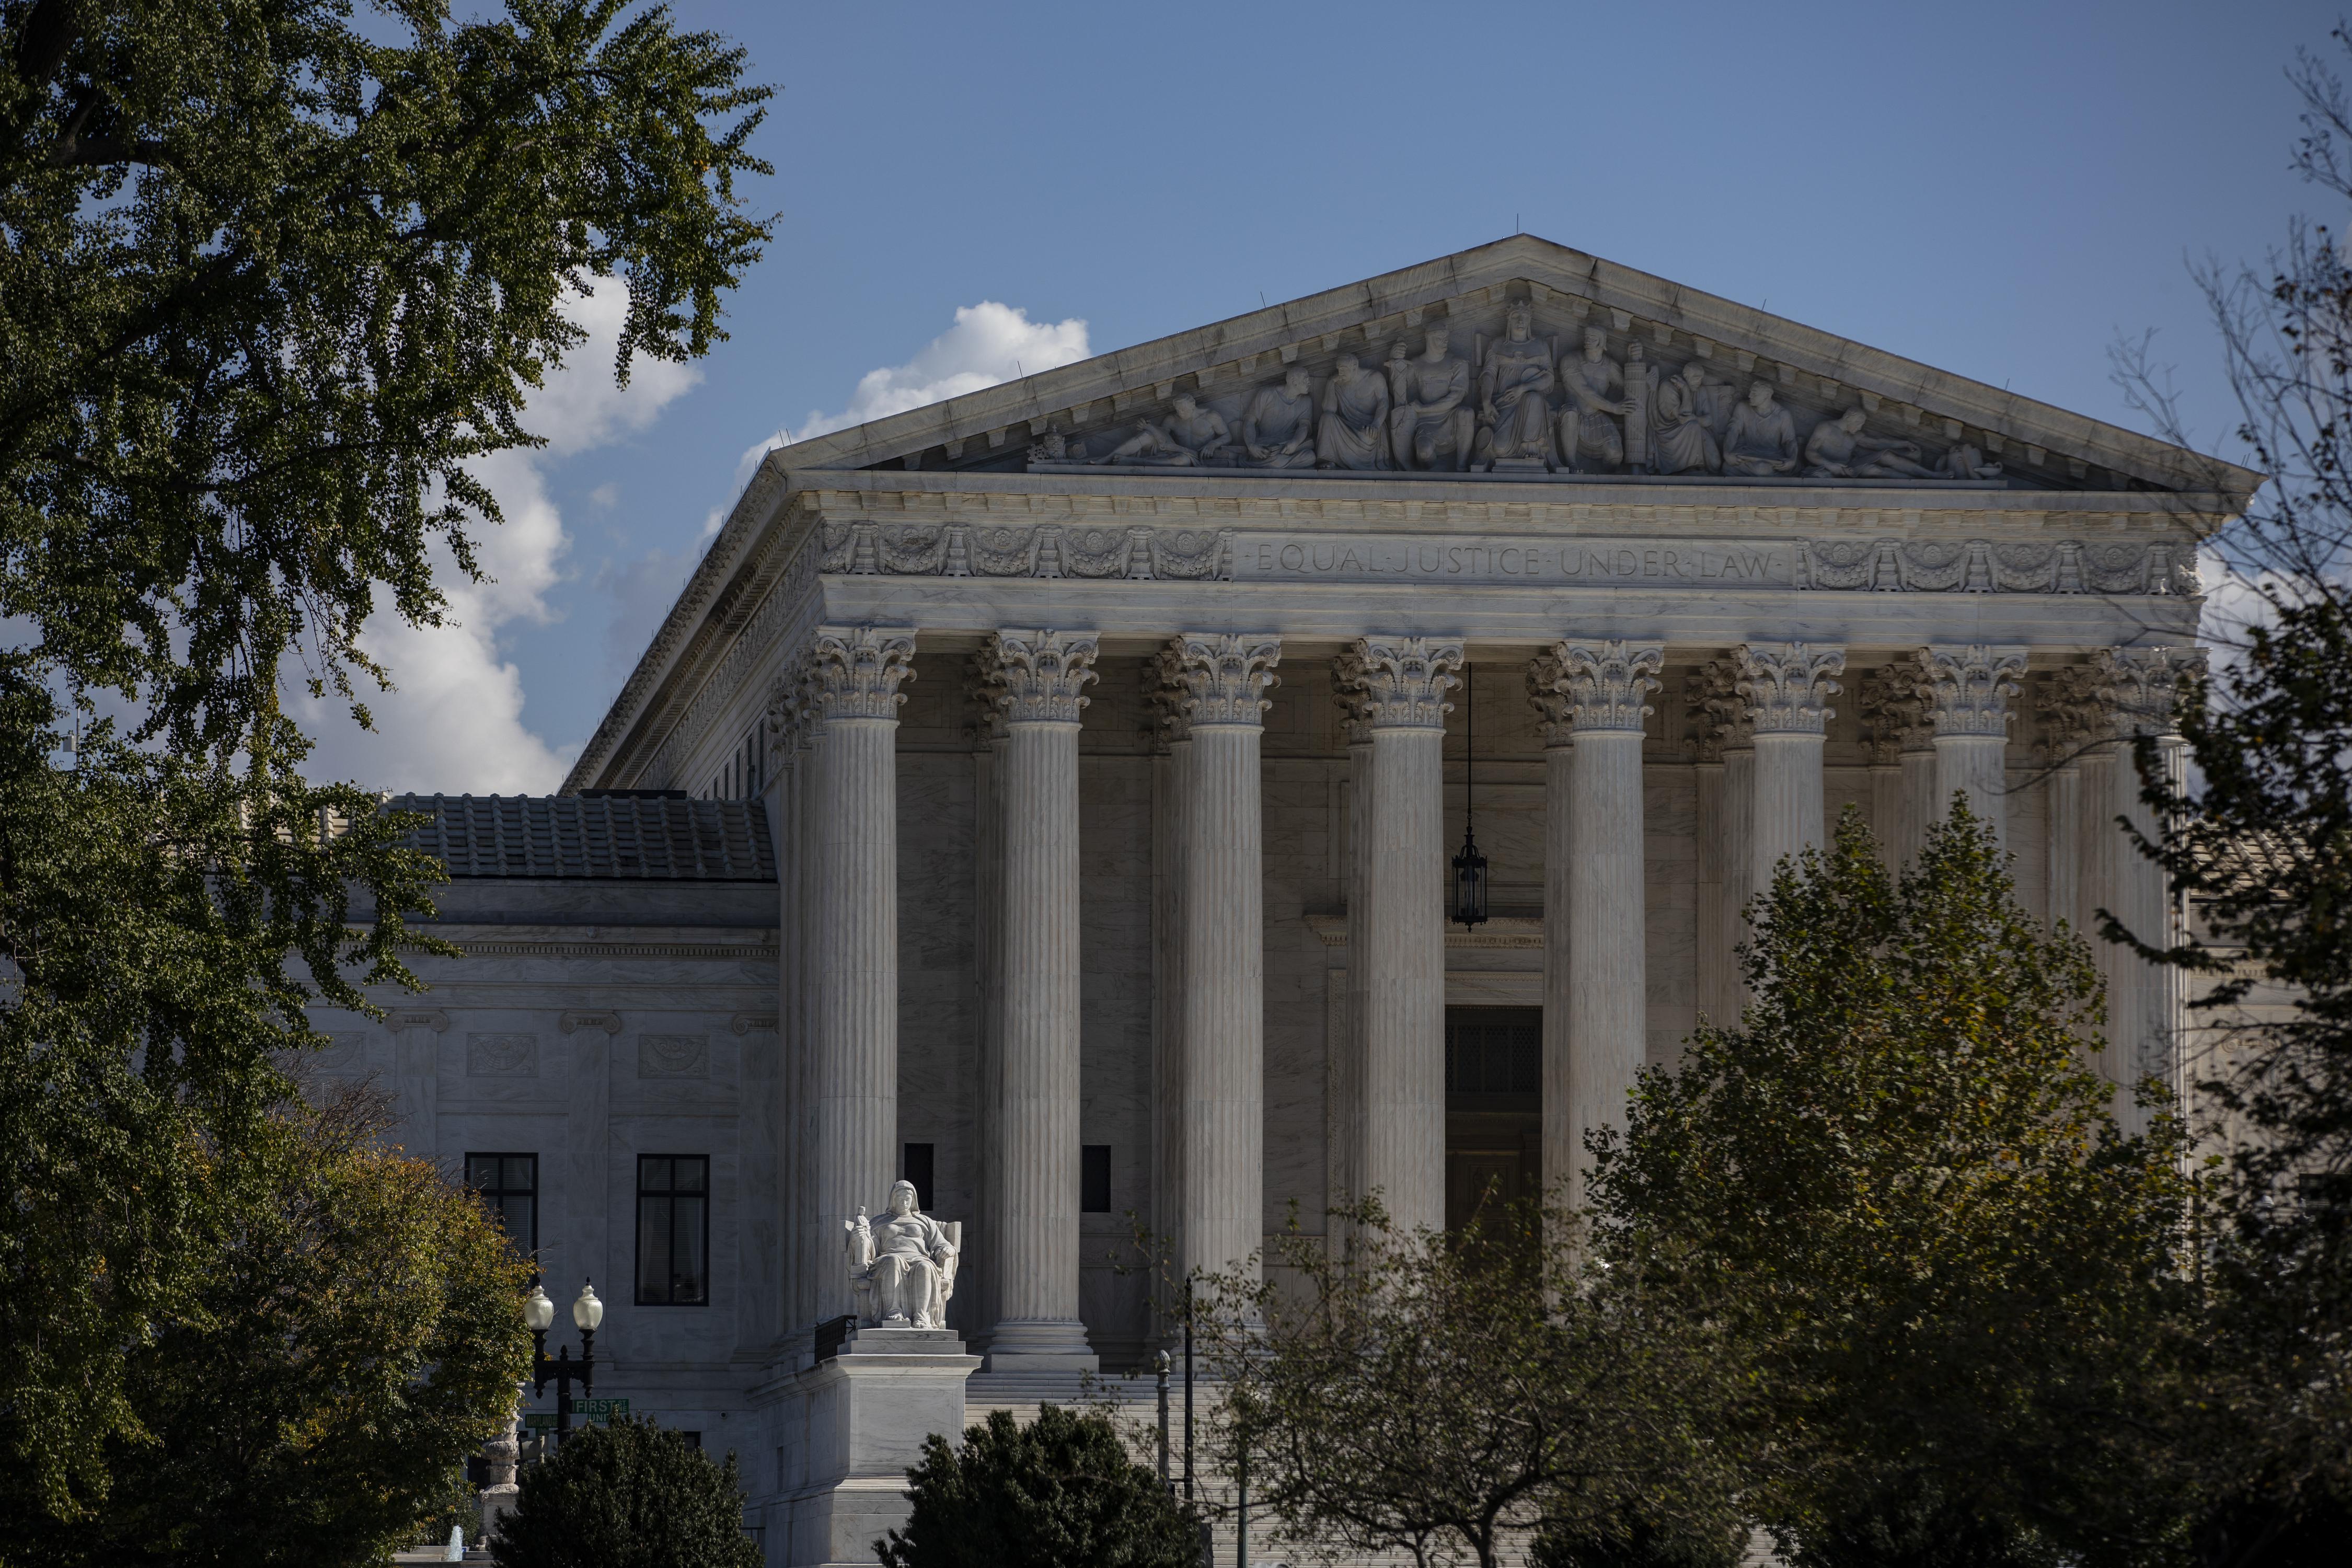 Trees on each side form the foreground of this image of the Supreme Court building with its grand columns.